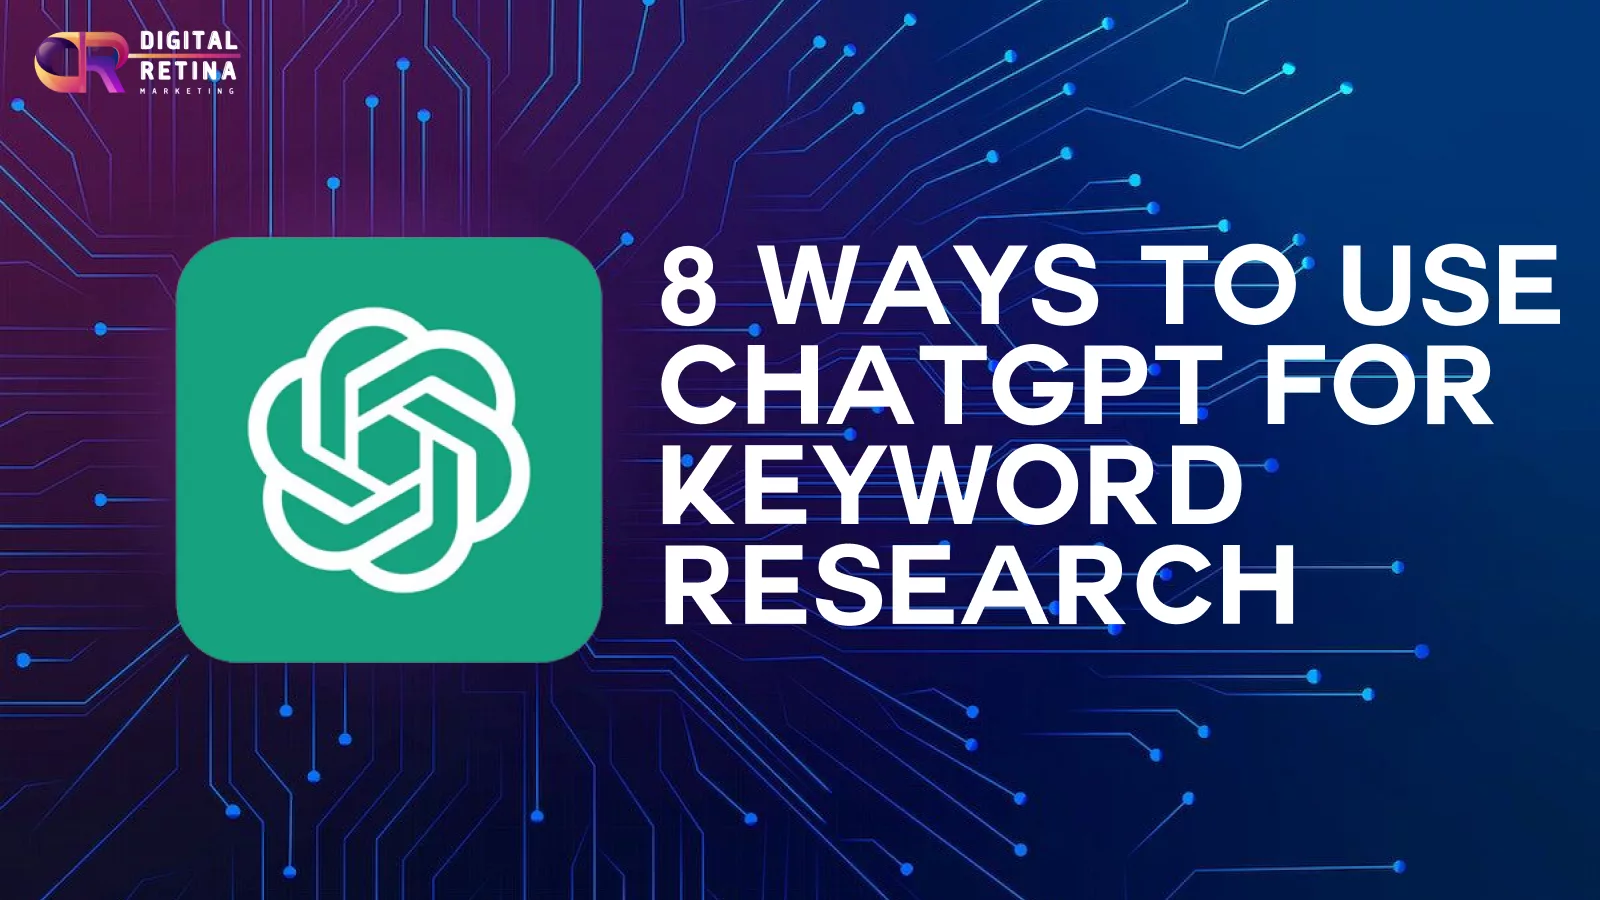 ChatGPT for Keyword Research